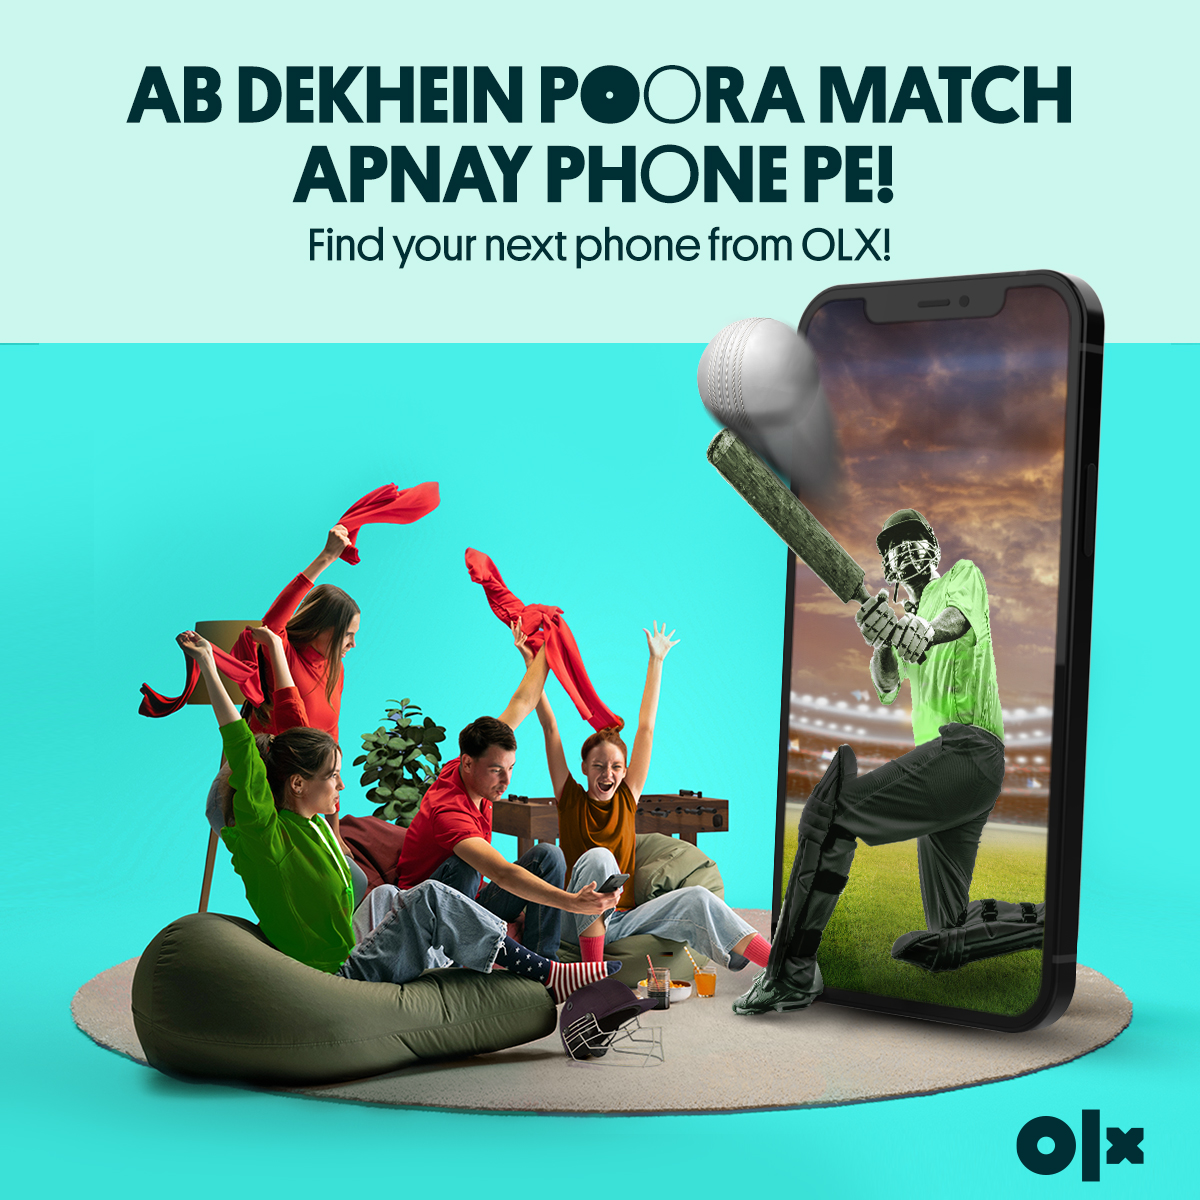 Get ready to bid farewell to your outdated brick of a phone, upgrade today and join the smartphone gang! Find the juiciest deals on OLX and experience cricket matches in high-definition glory. 

#OLXPakistan #samsungzflip3 #xiaomi12 #appleiphone12